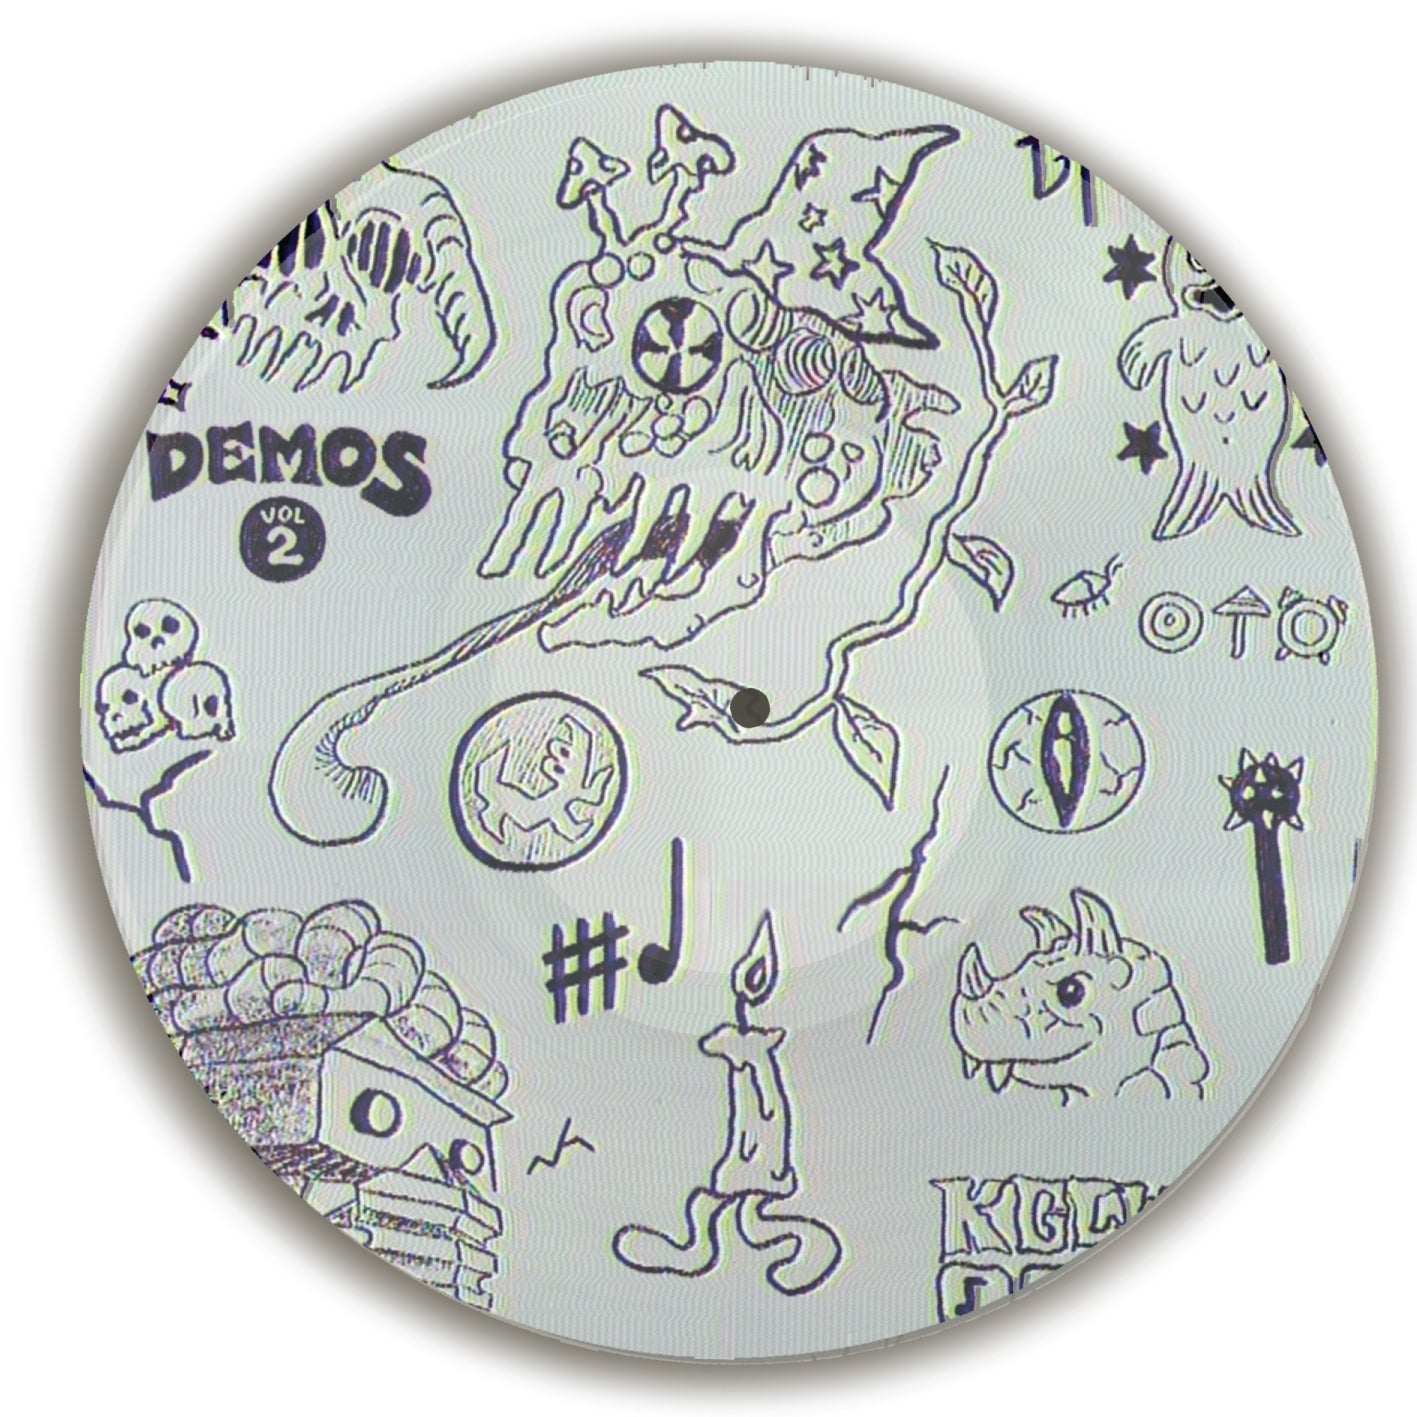 Demos Picture Discs Vol 1 + Vol 2 (Bootleg by GIZZ'S PICK'S)